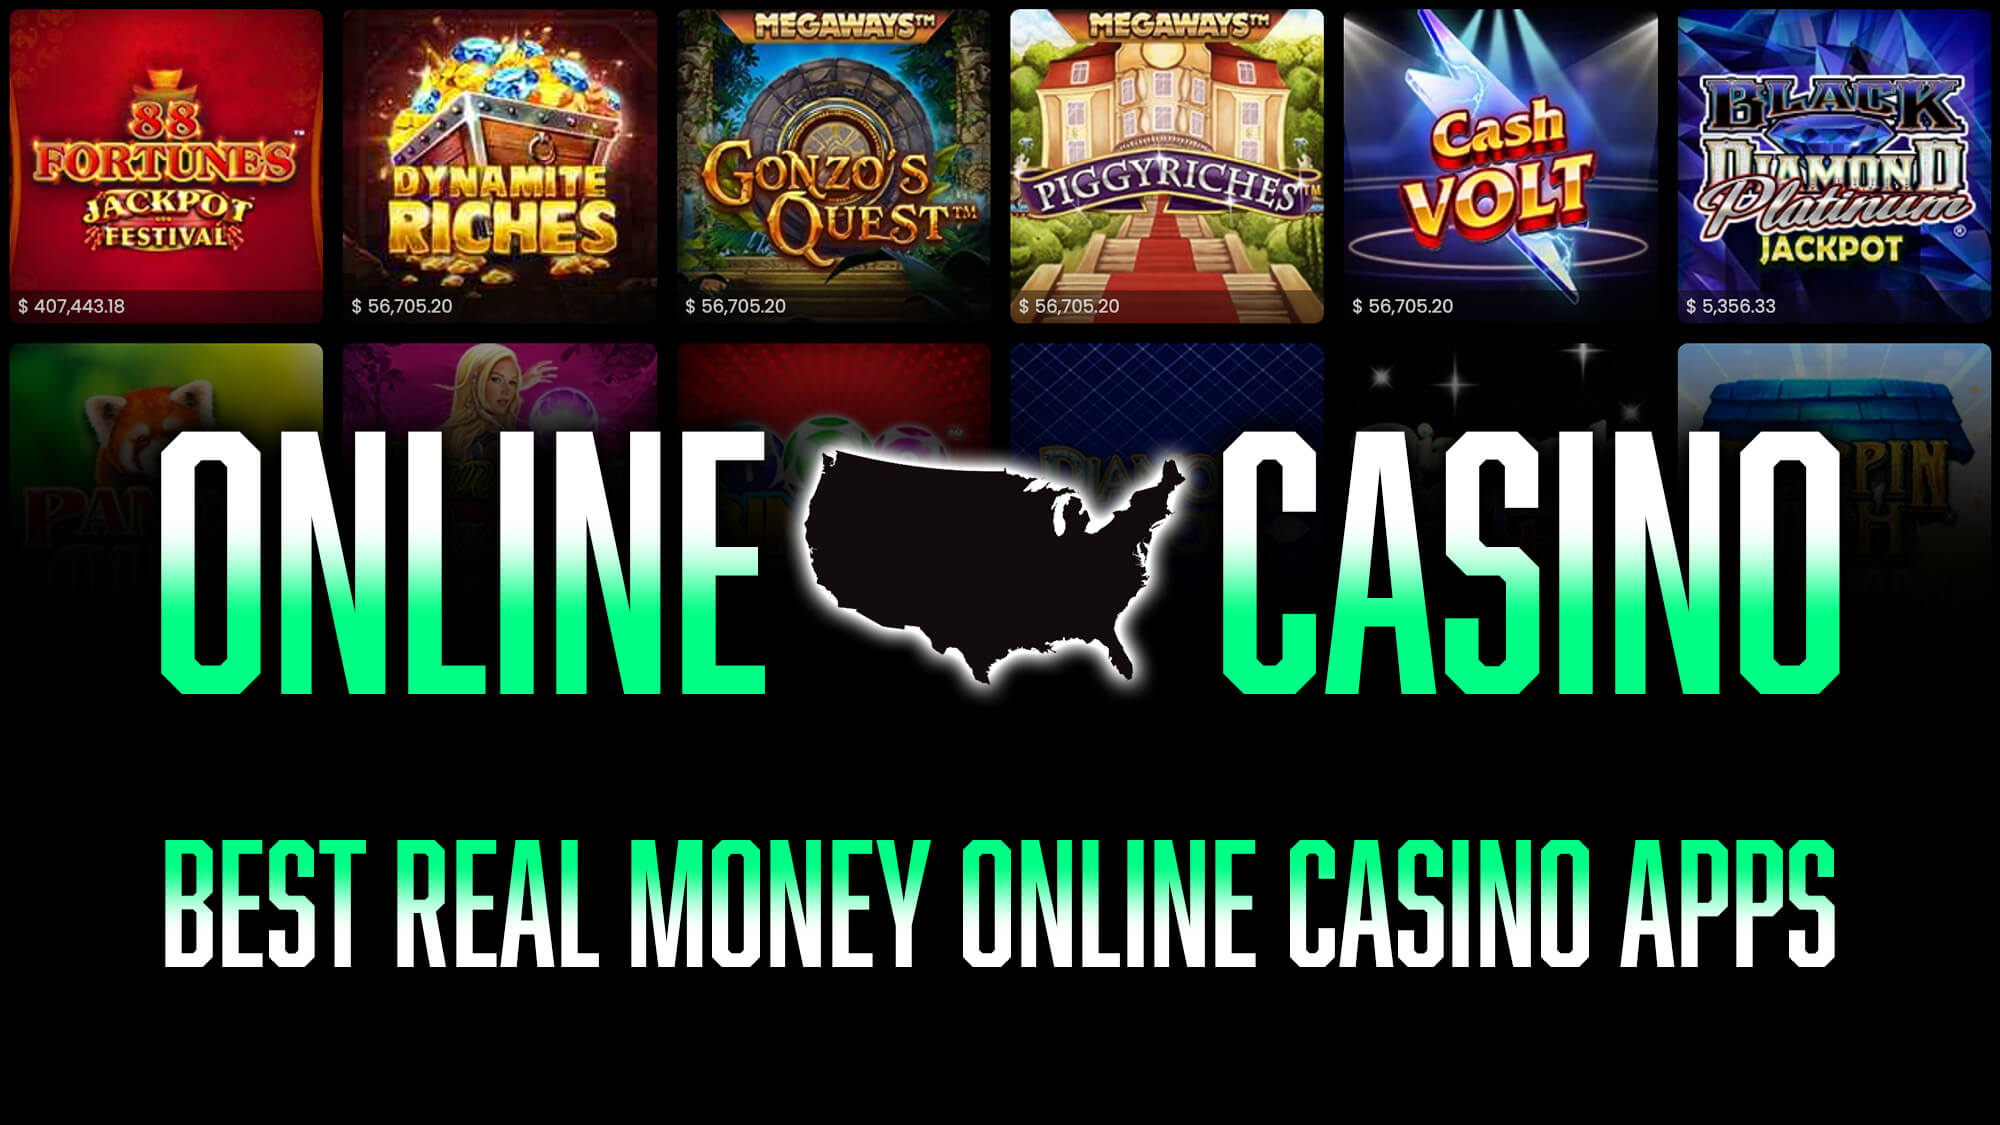 Why I Hate best online casinos